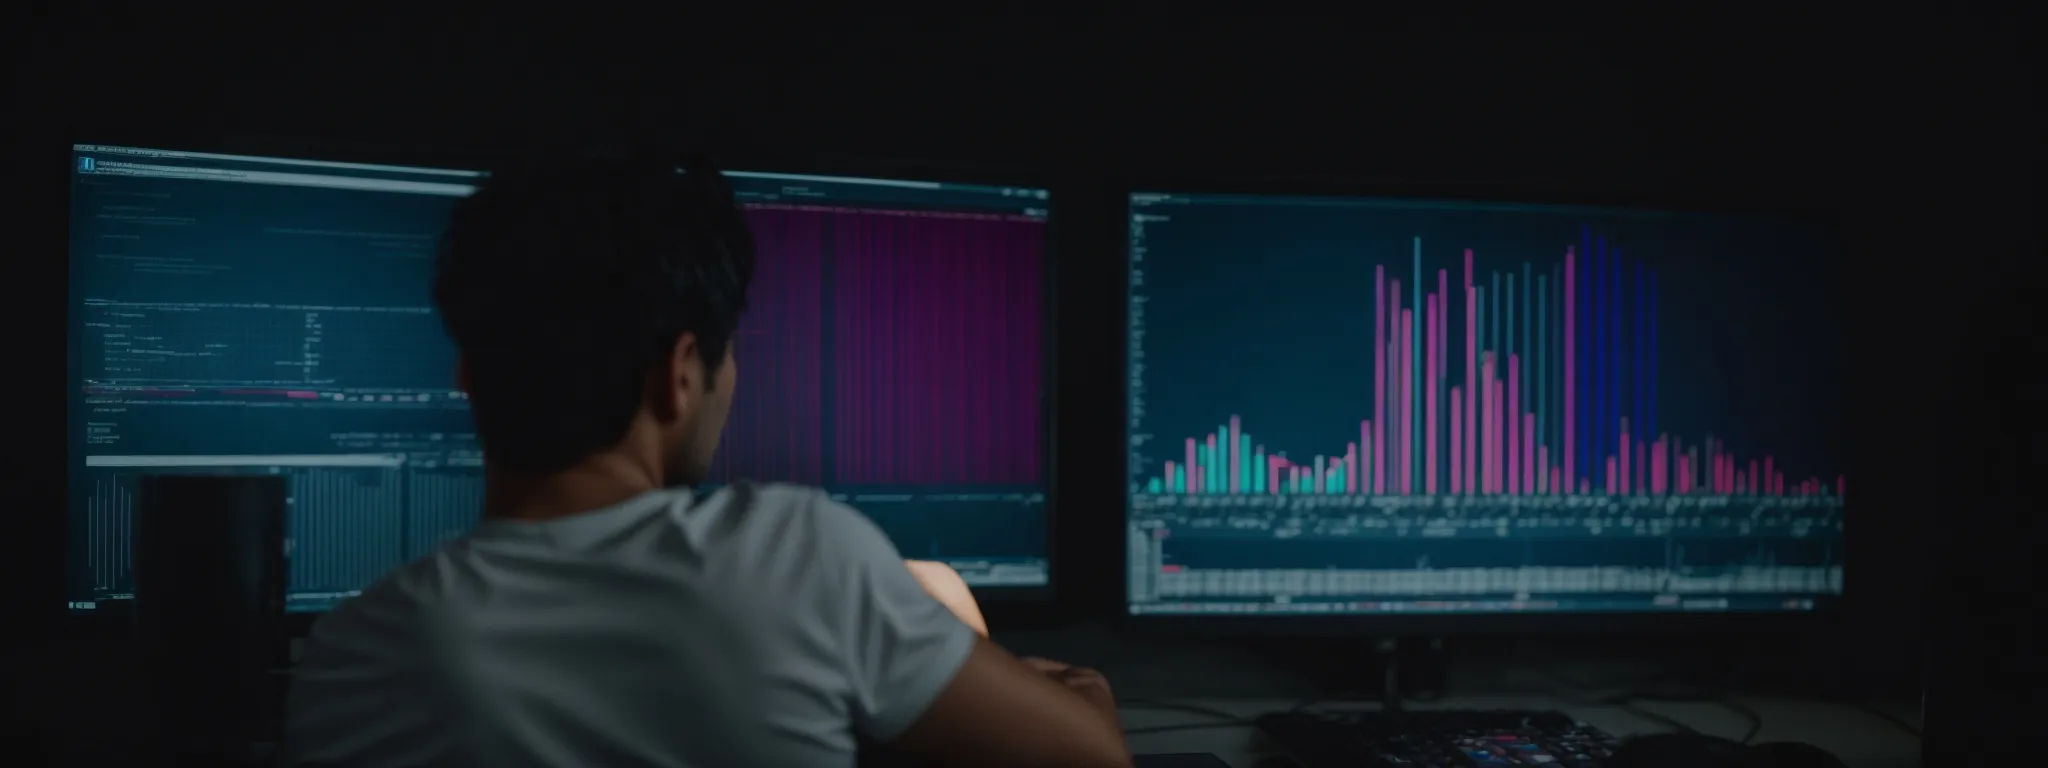 a person peering intently at a brightly lit computer screen displaying colorful analytics graphs, deep in thought.